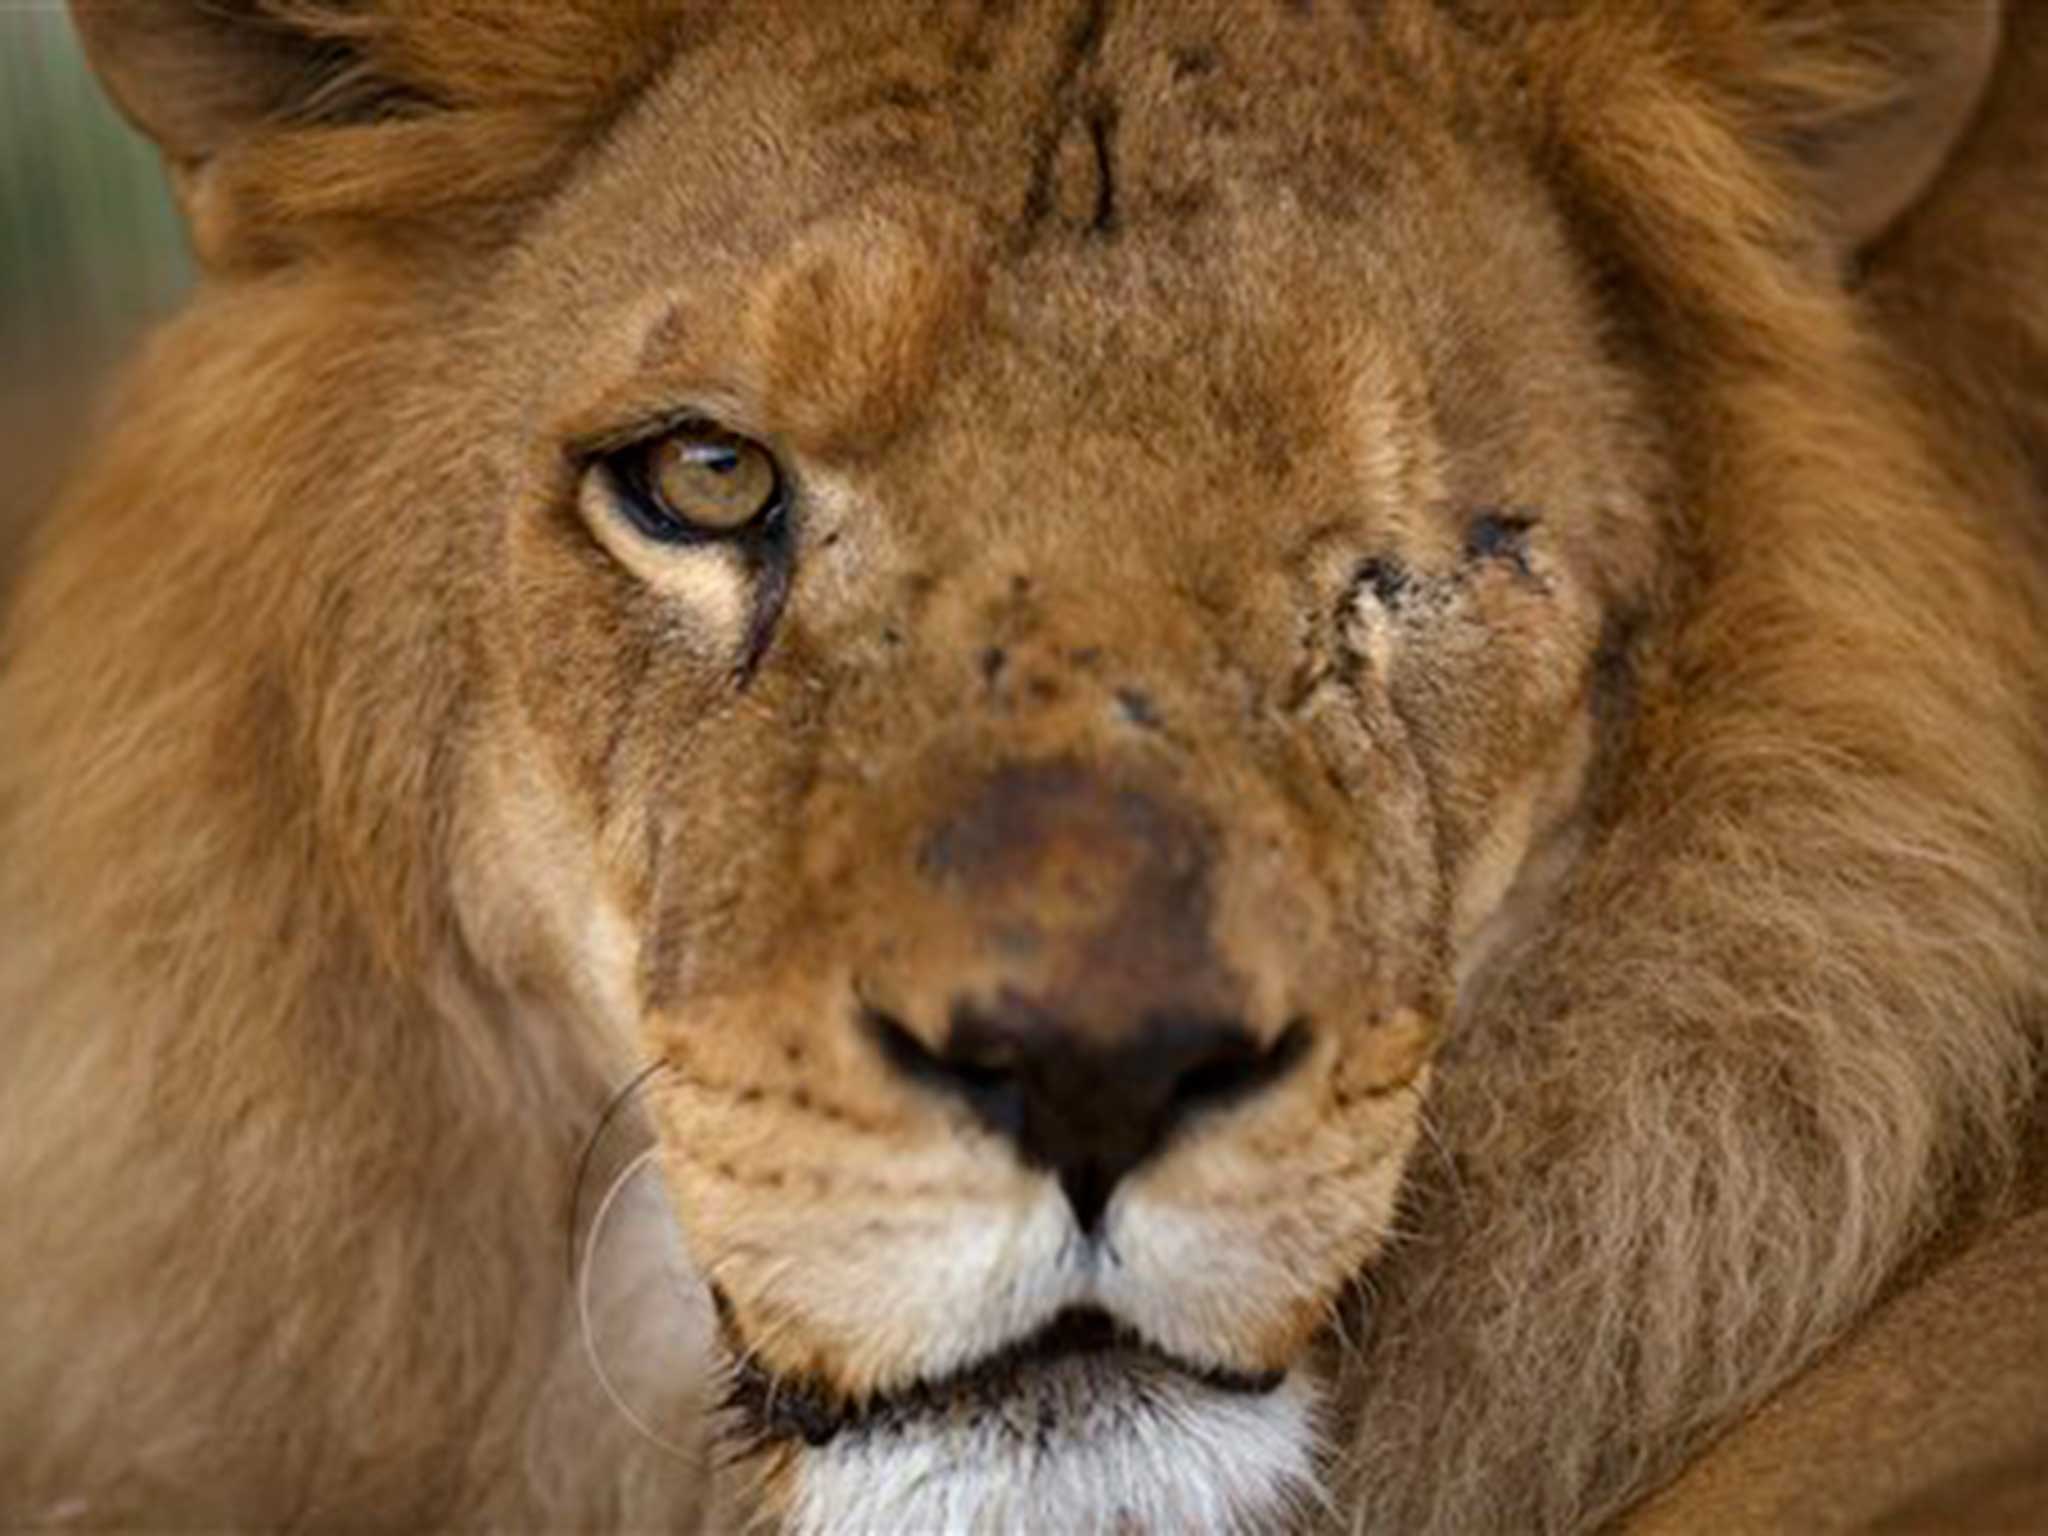 Rescued lions en route to new home in US after being so badly abused